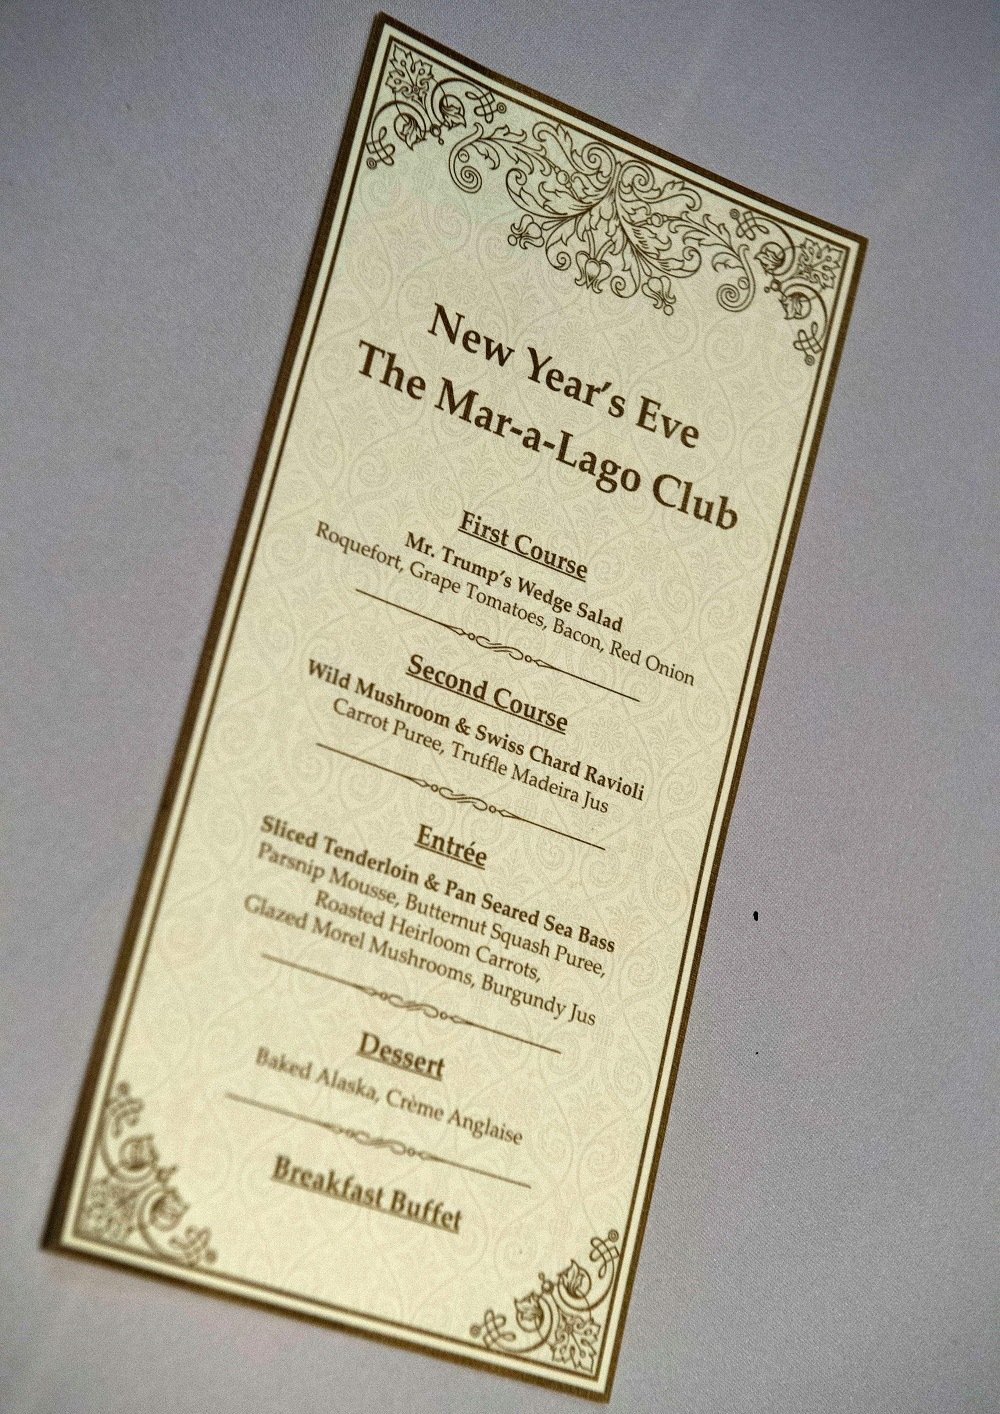 The menu for US President-elect Donald Trumo's New Year's Eve party at the Mar-a-Lago Club